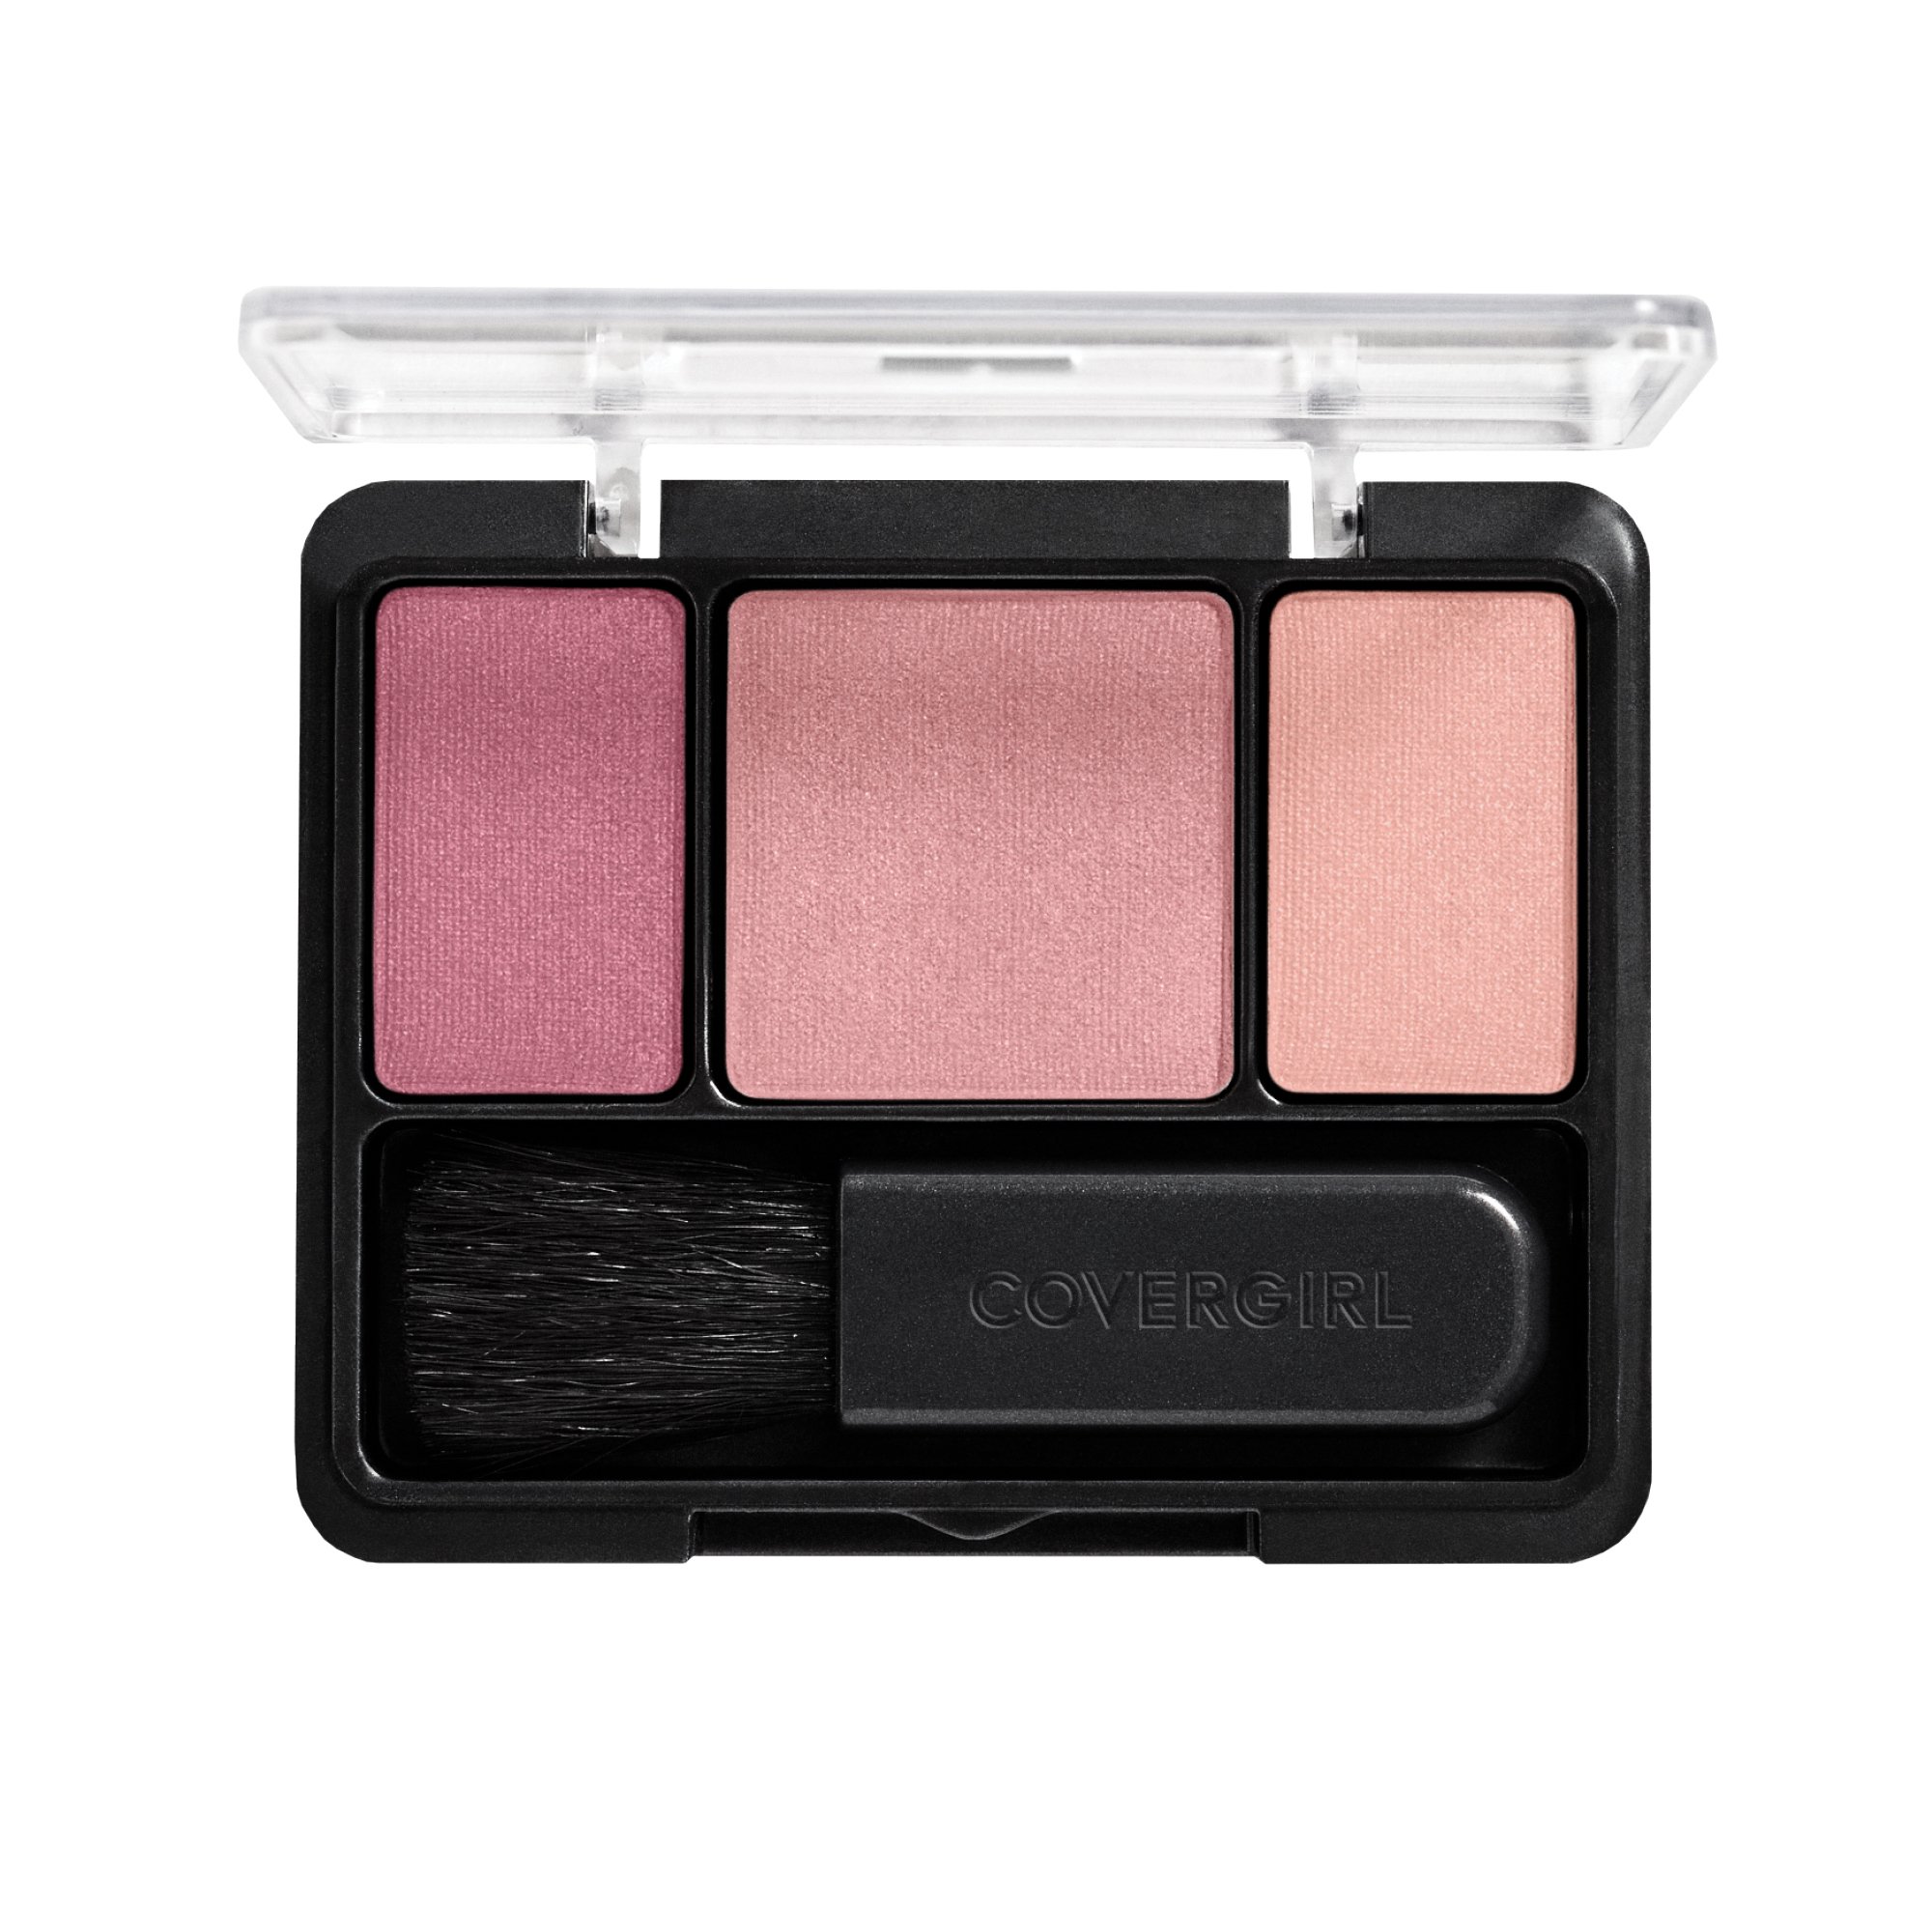 COVERGIRL Instant Cheekbones Contouring Blush Purely Plum 220, 0.29 Ounce Pan (packaging may vary)